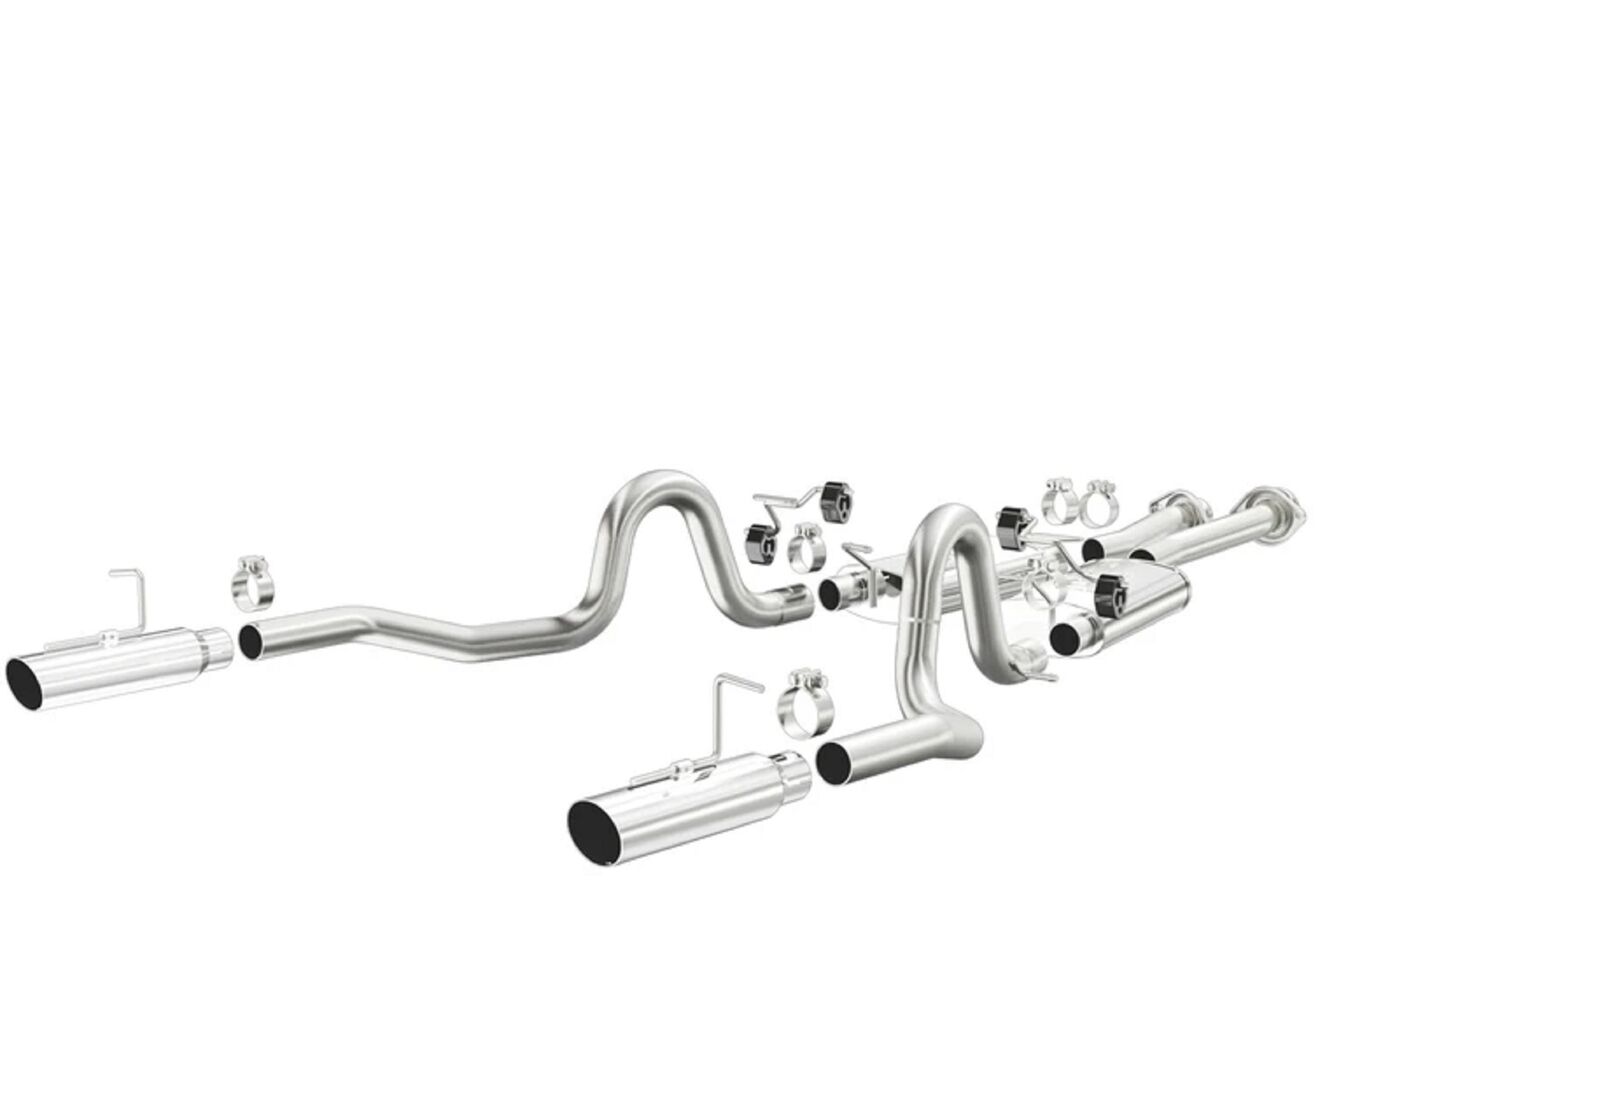 MAGNAFLOW 15638 Stainless Steel Cat-Back Exhaust Kit For 94-95 MUSTANG V8 5.0L